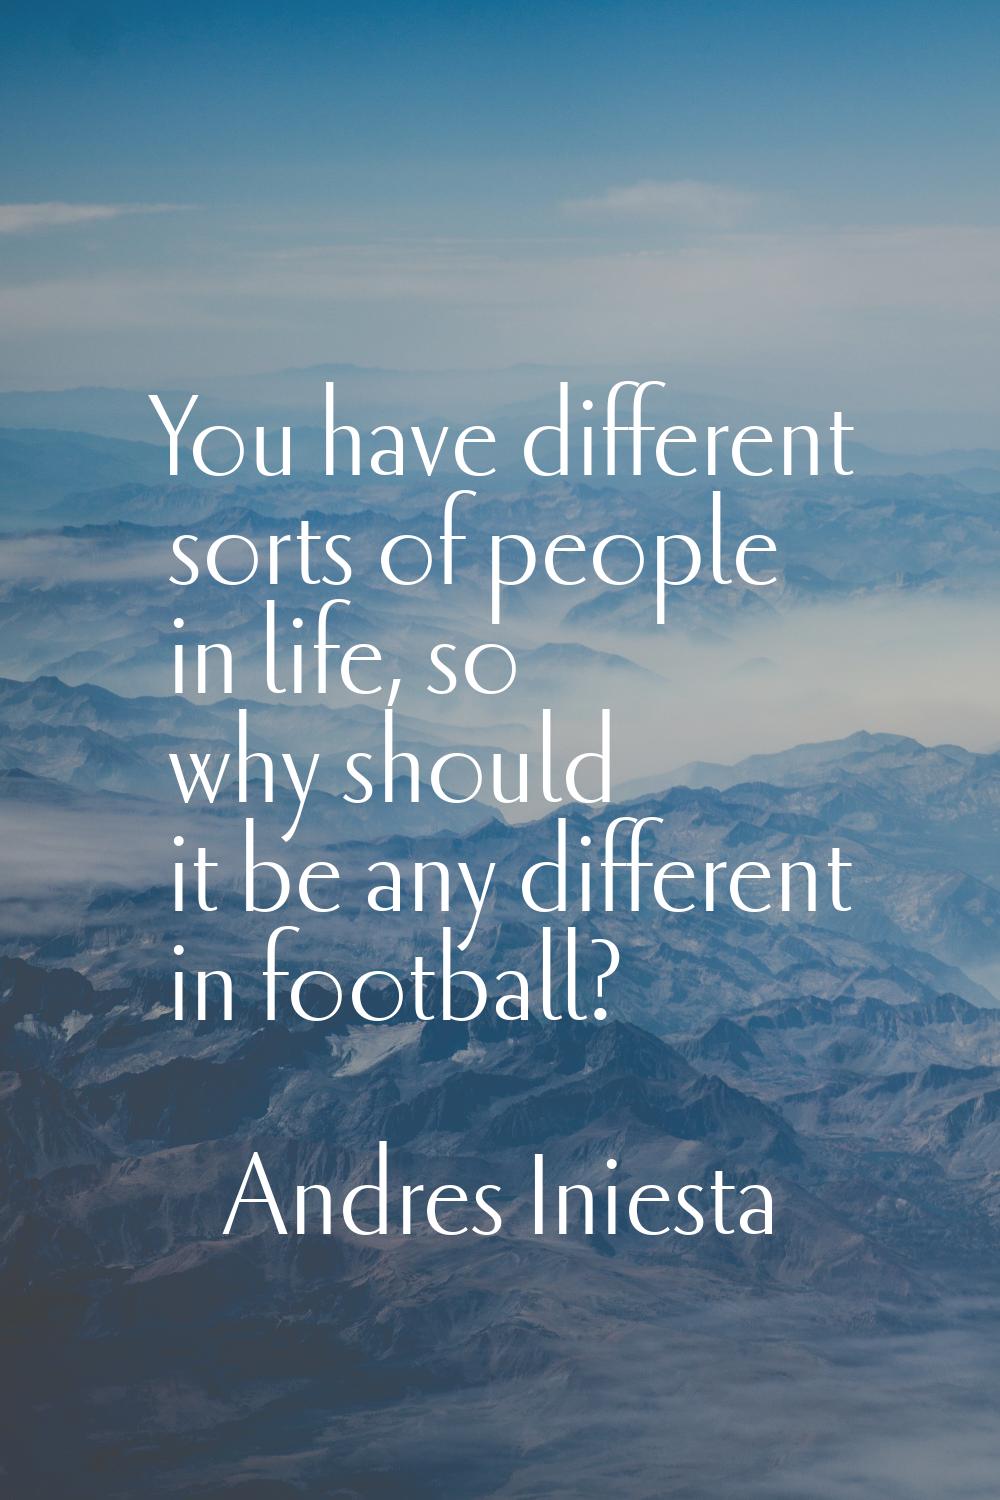 You have different sorts of people in life, so why should it be any different in football?